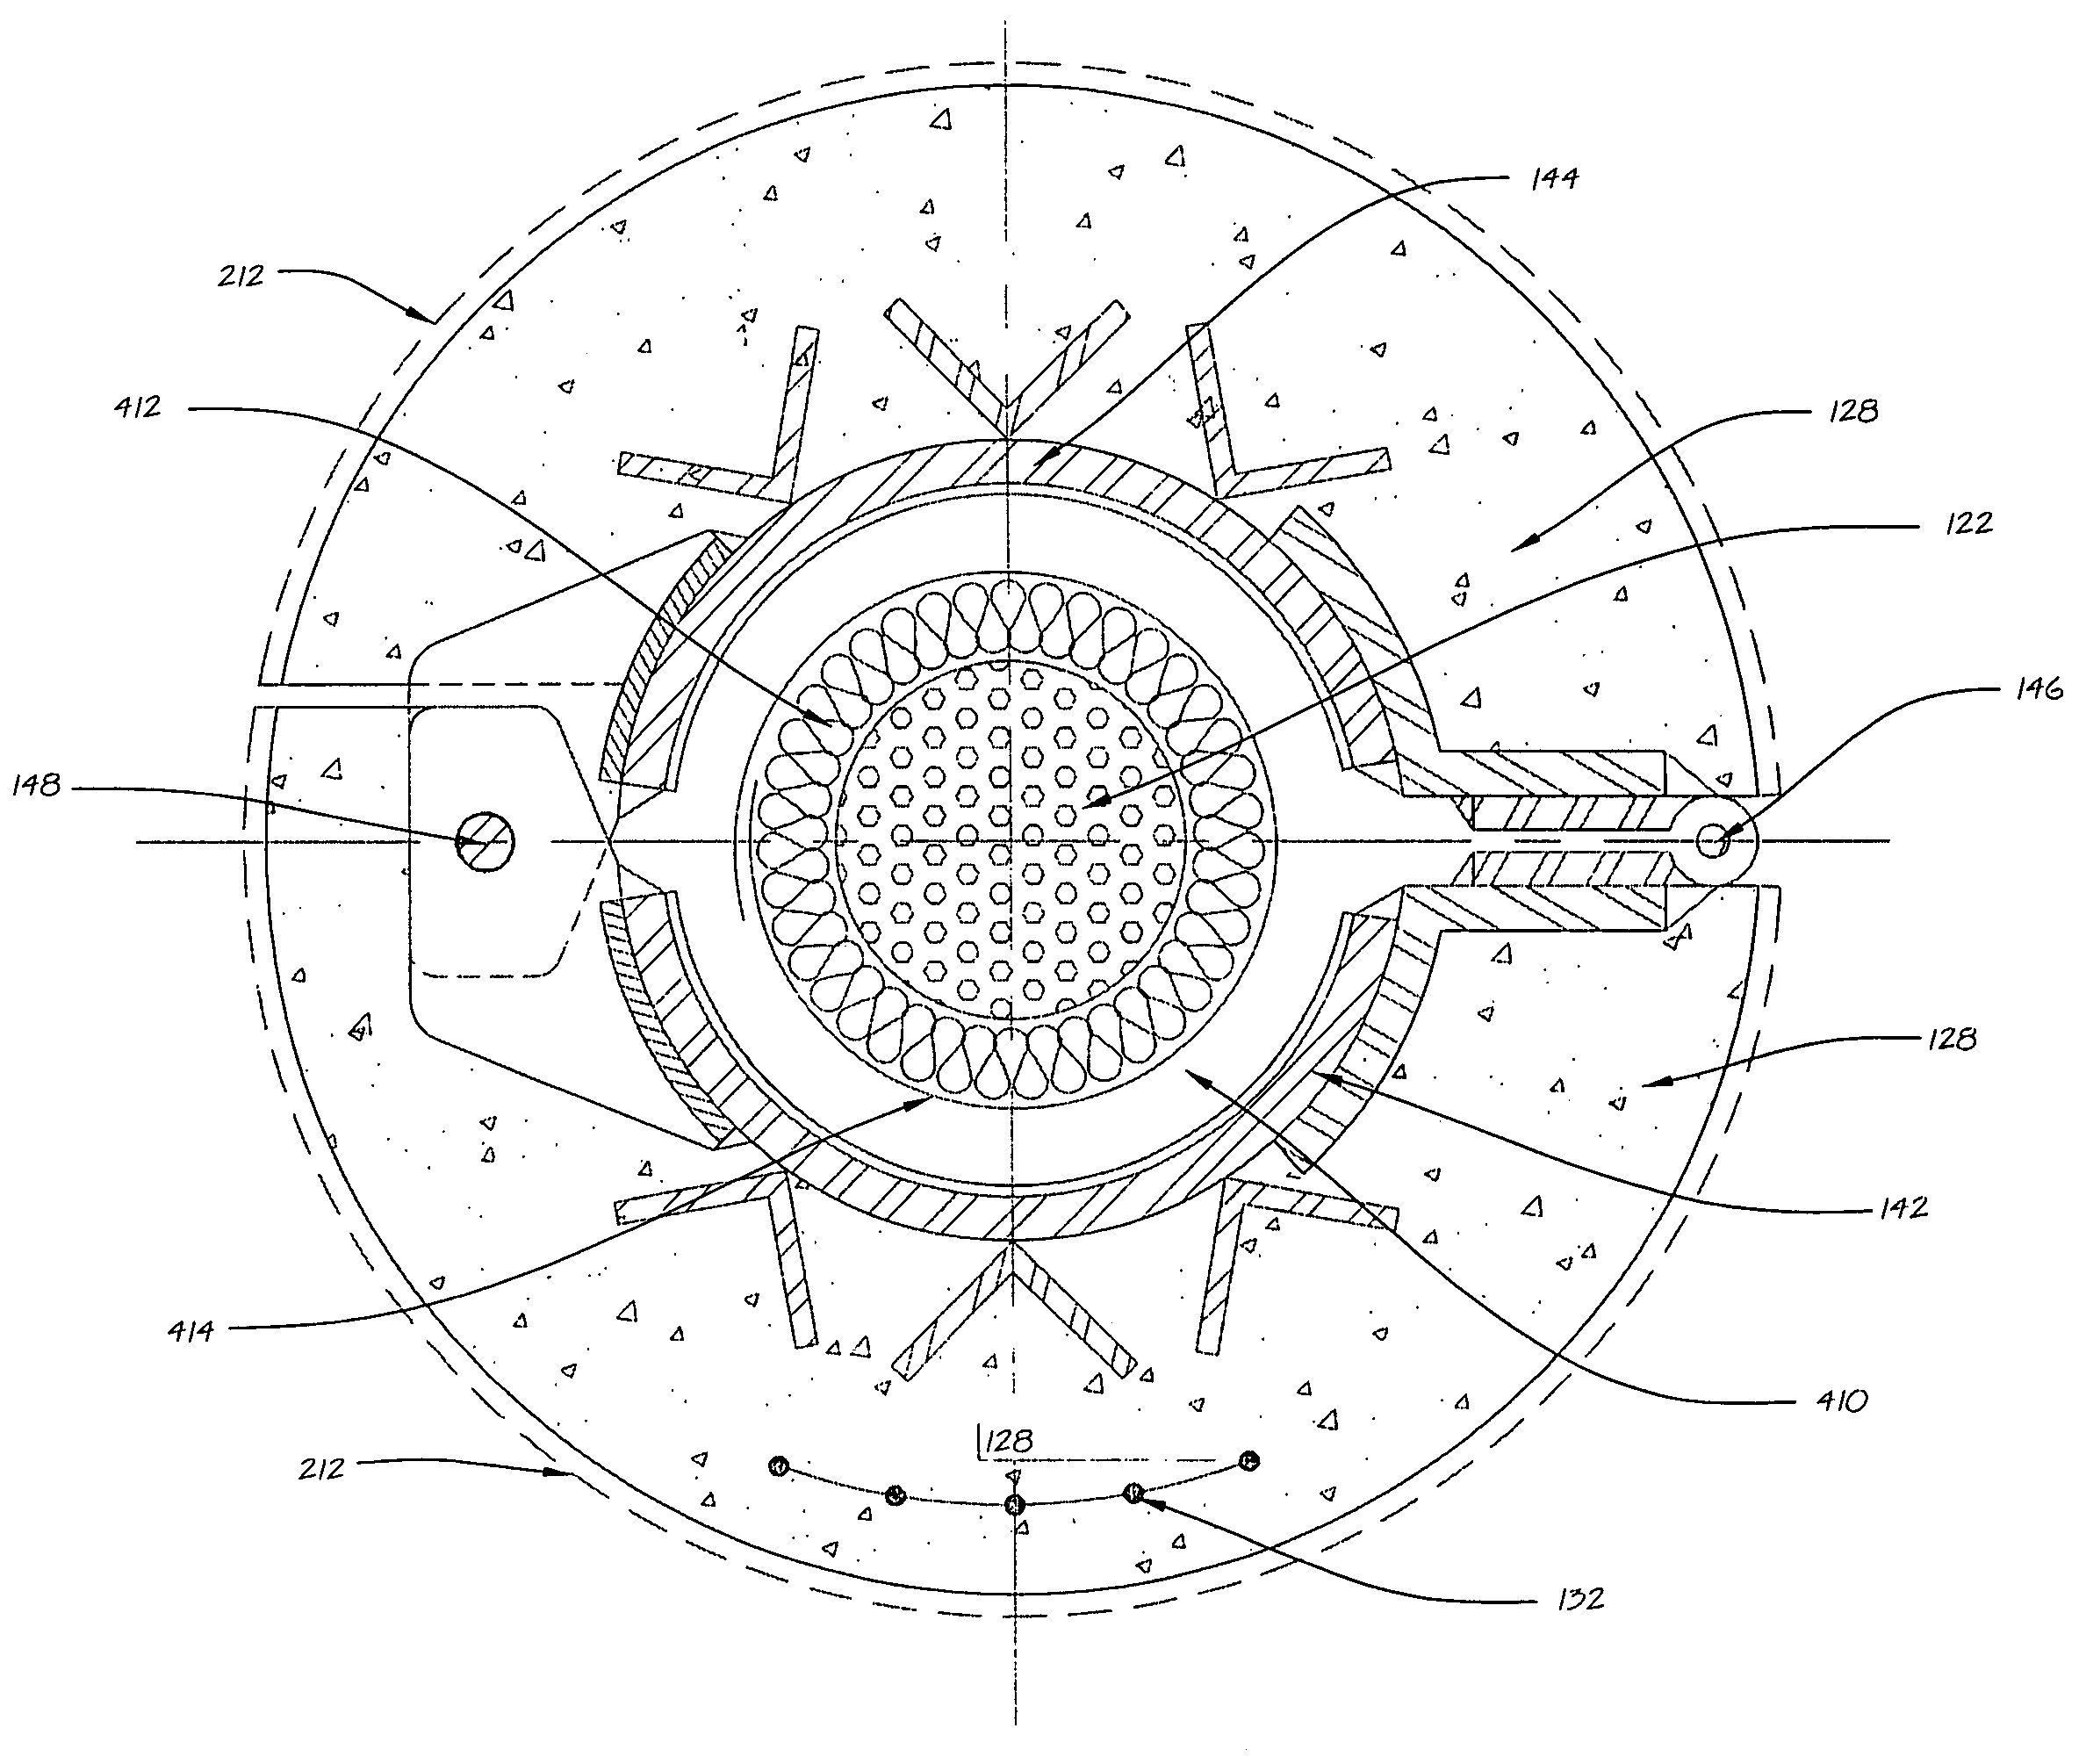 Shielding for structural support elements